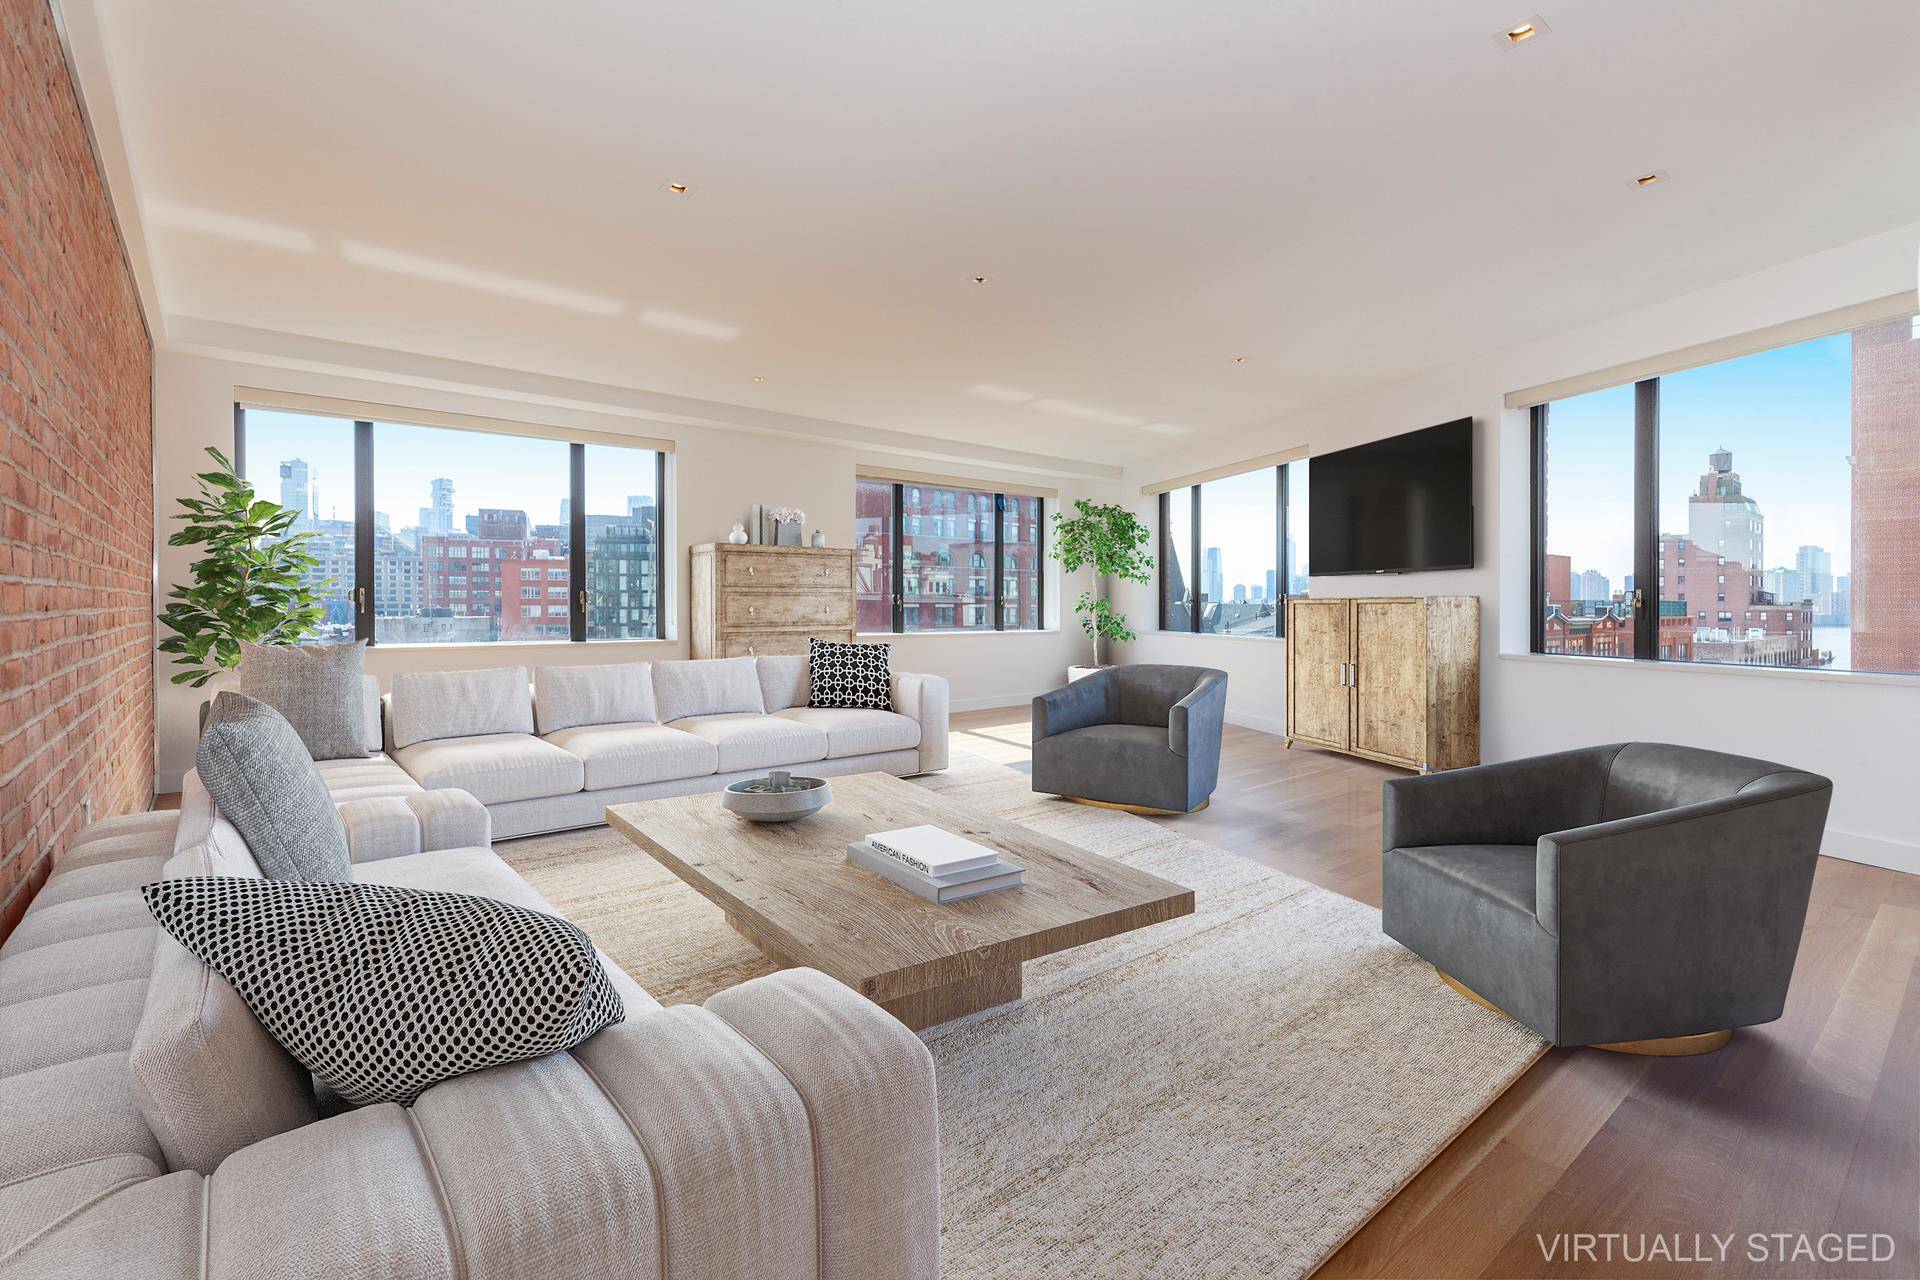 BESPOKE CORNER TRIPLEX with sweeping views of downtown from the freedom Tower to the Hudson River.